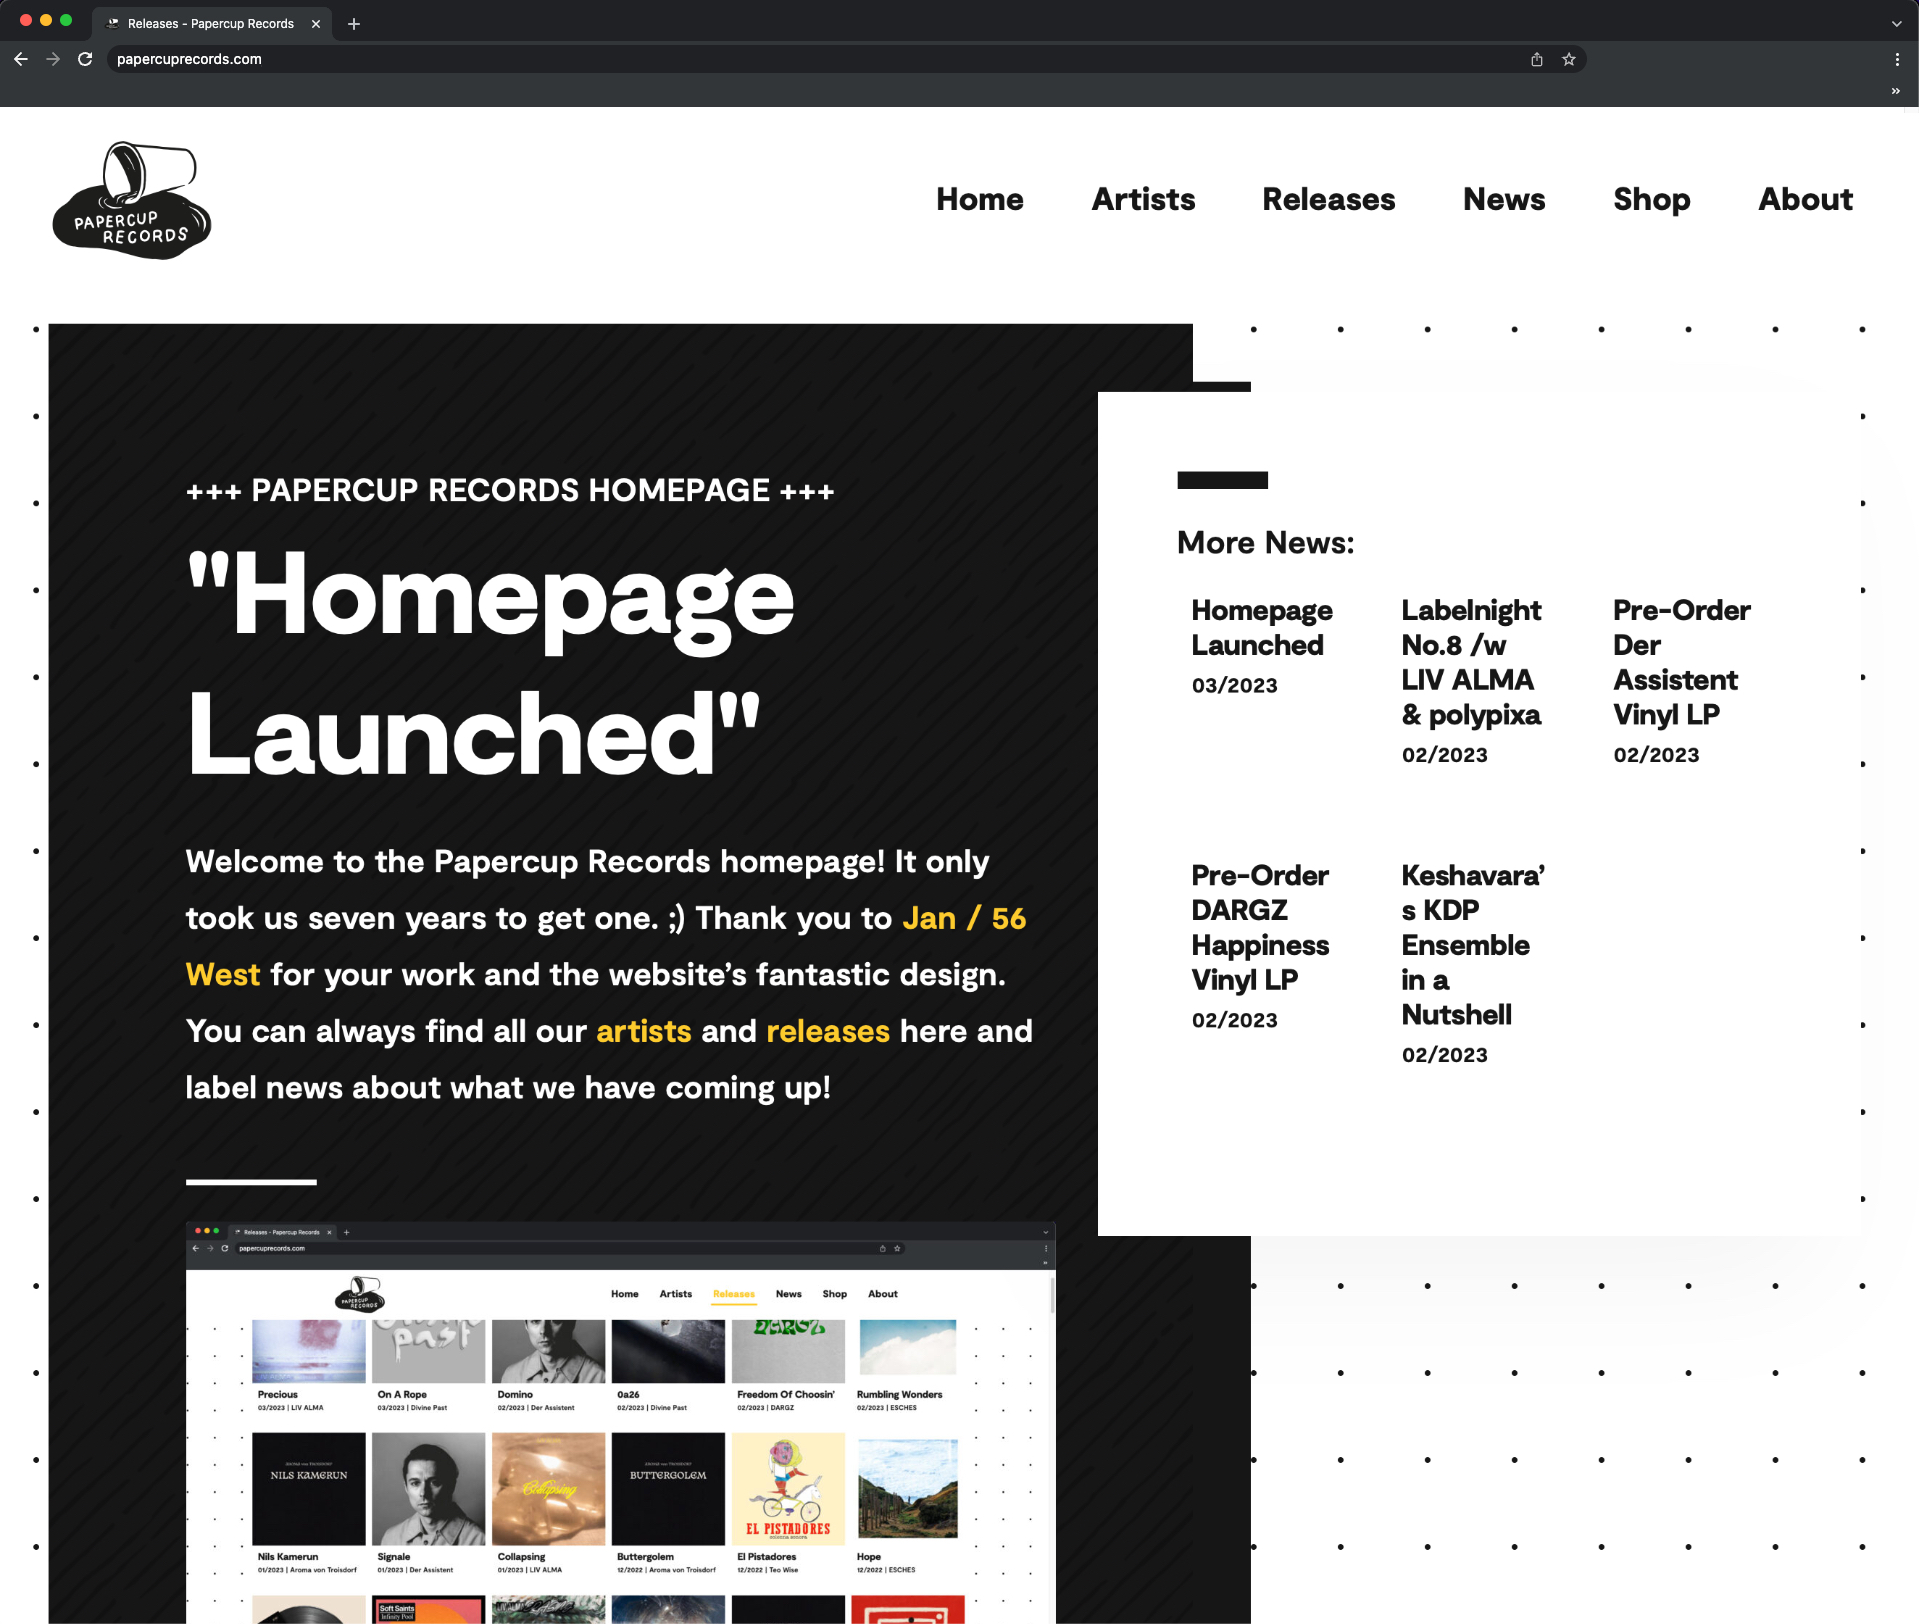 Homepage Launched